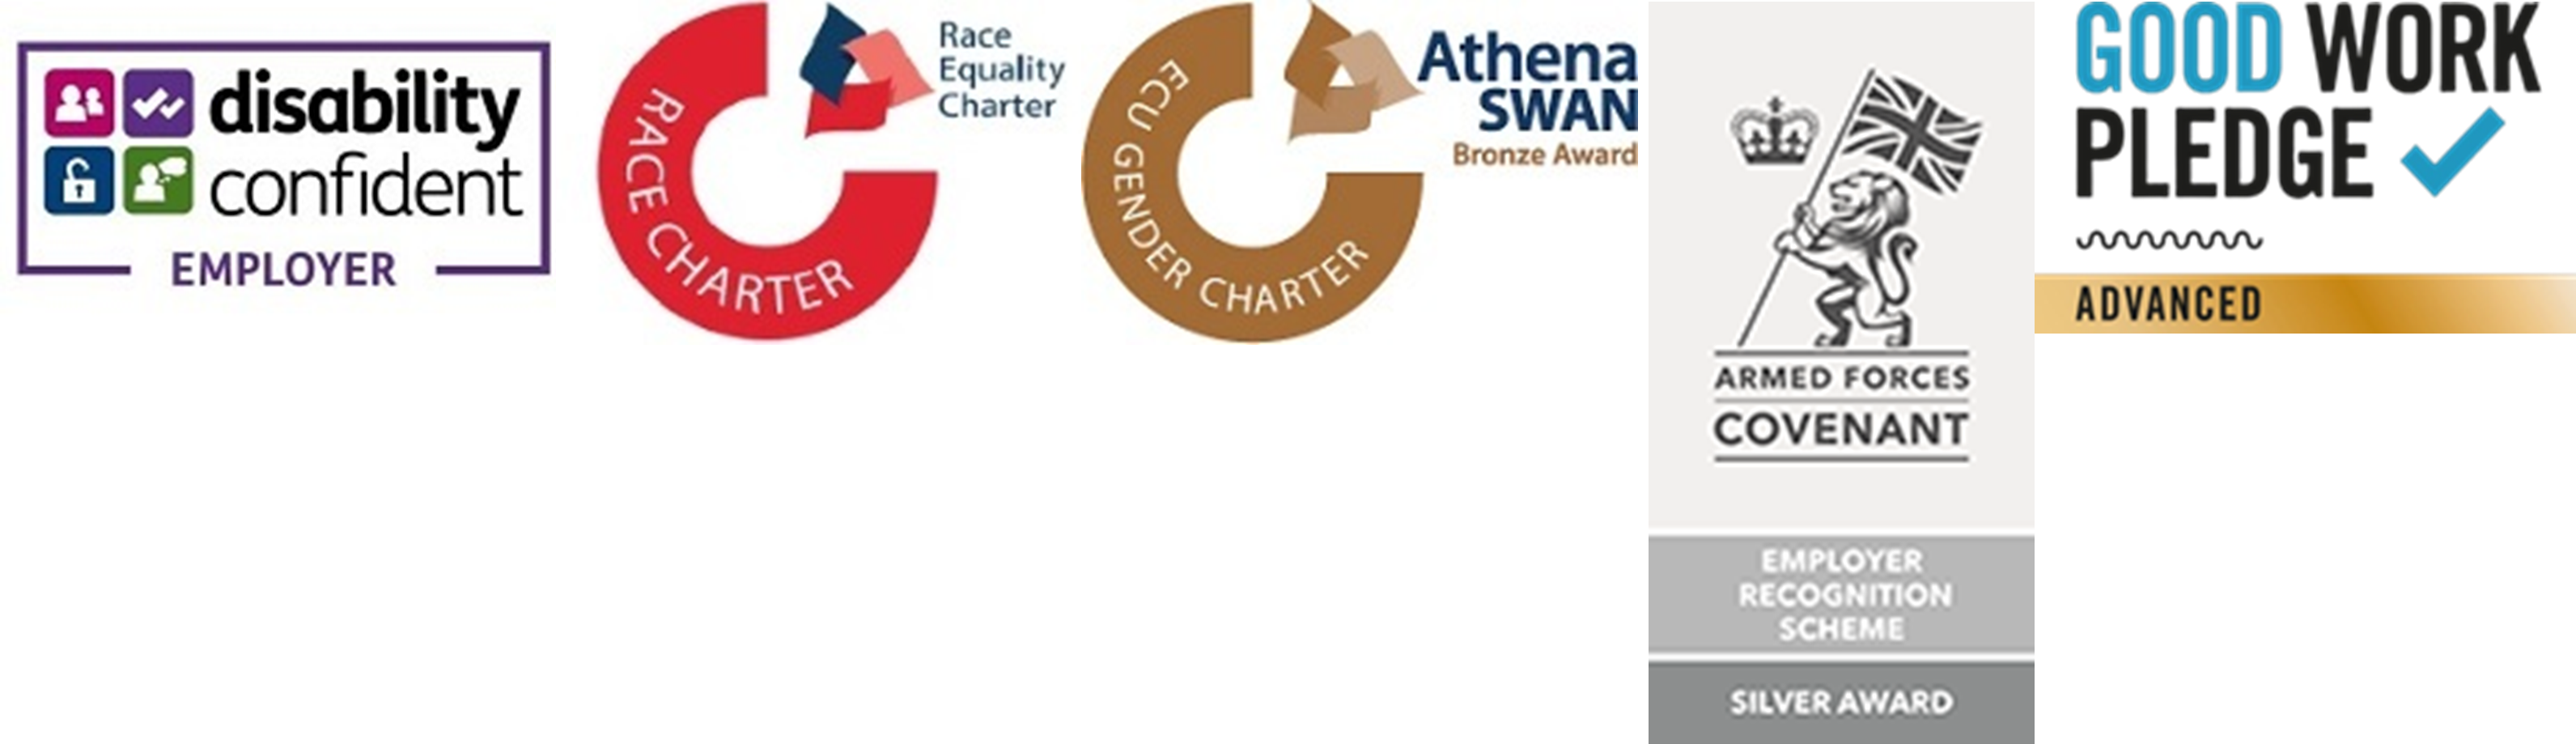 Disability Confident Employer Logo, Good Work Pledge Advanced Logo, Race Equality Charter Logo, Athena Swan Bronze Award EUC Gender Charter Logo and Armed Forces Covenant